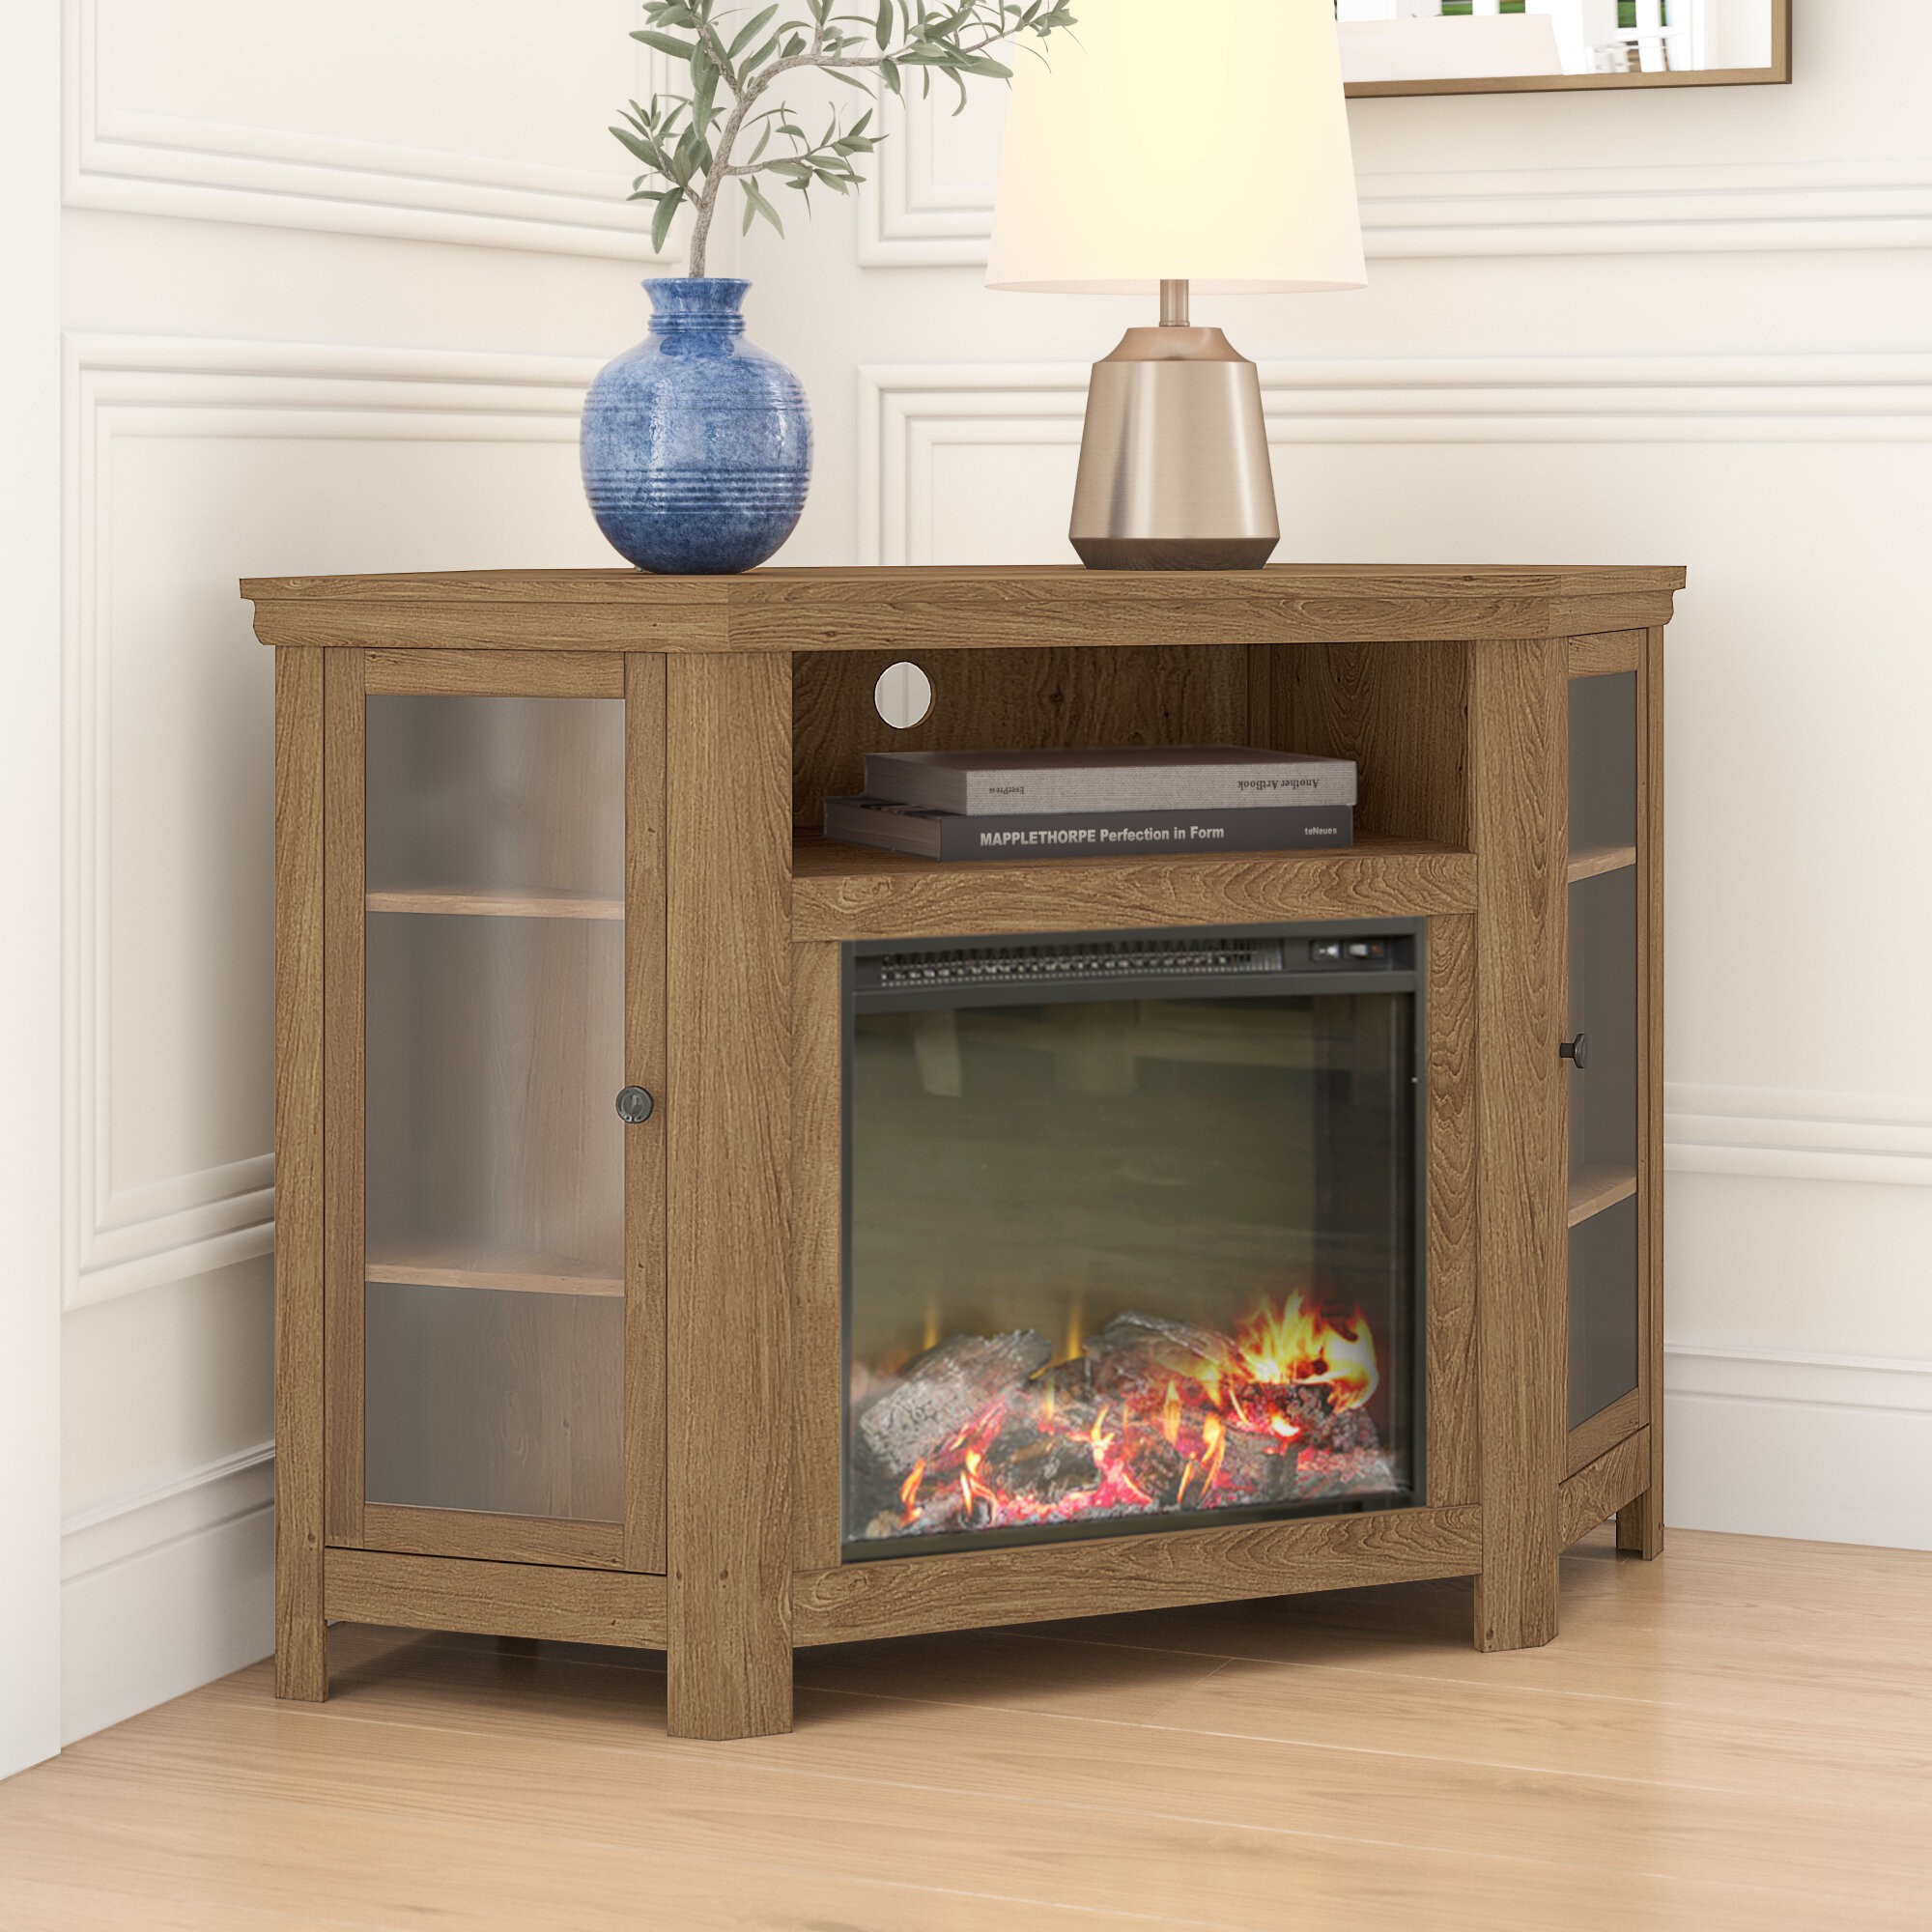 Tieton Corner TV Stand for TVs up to 50" with Electric Fireplace Included